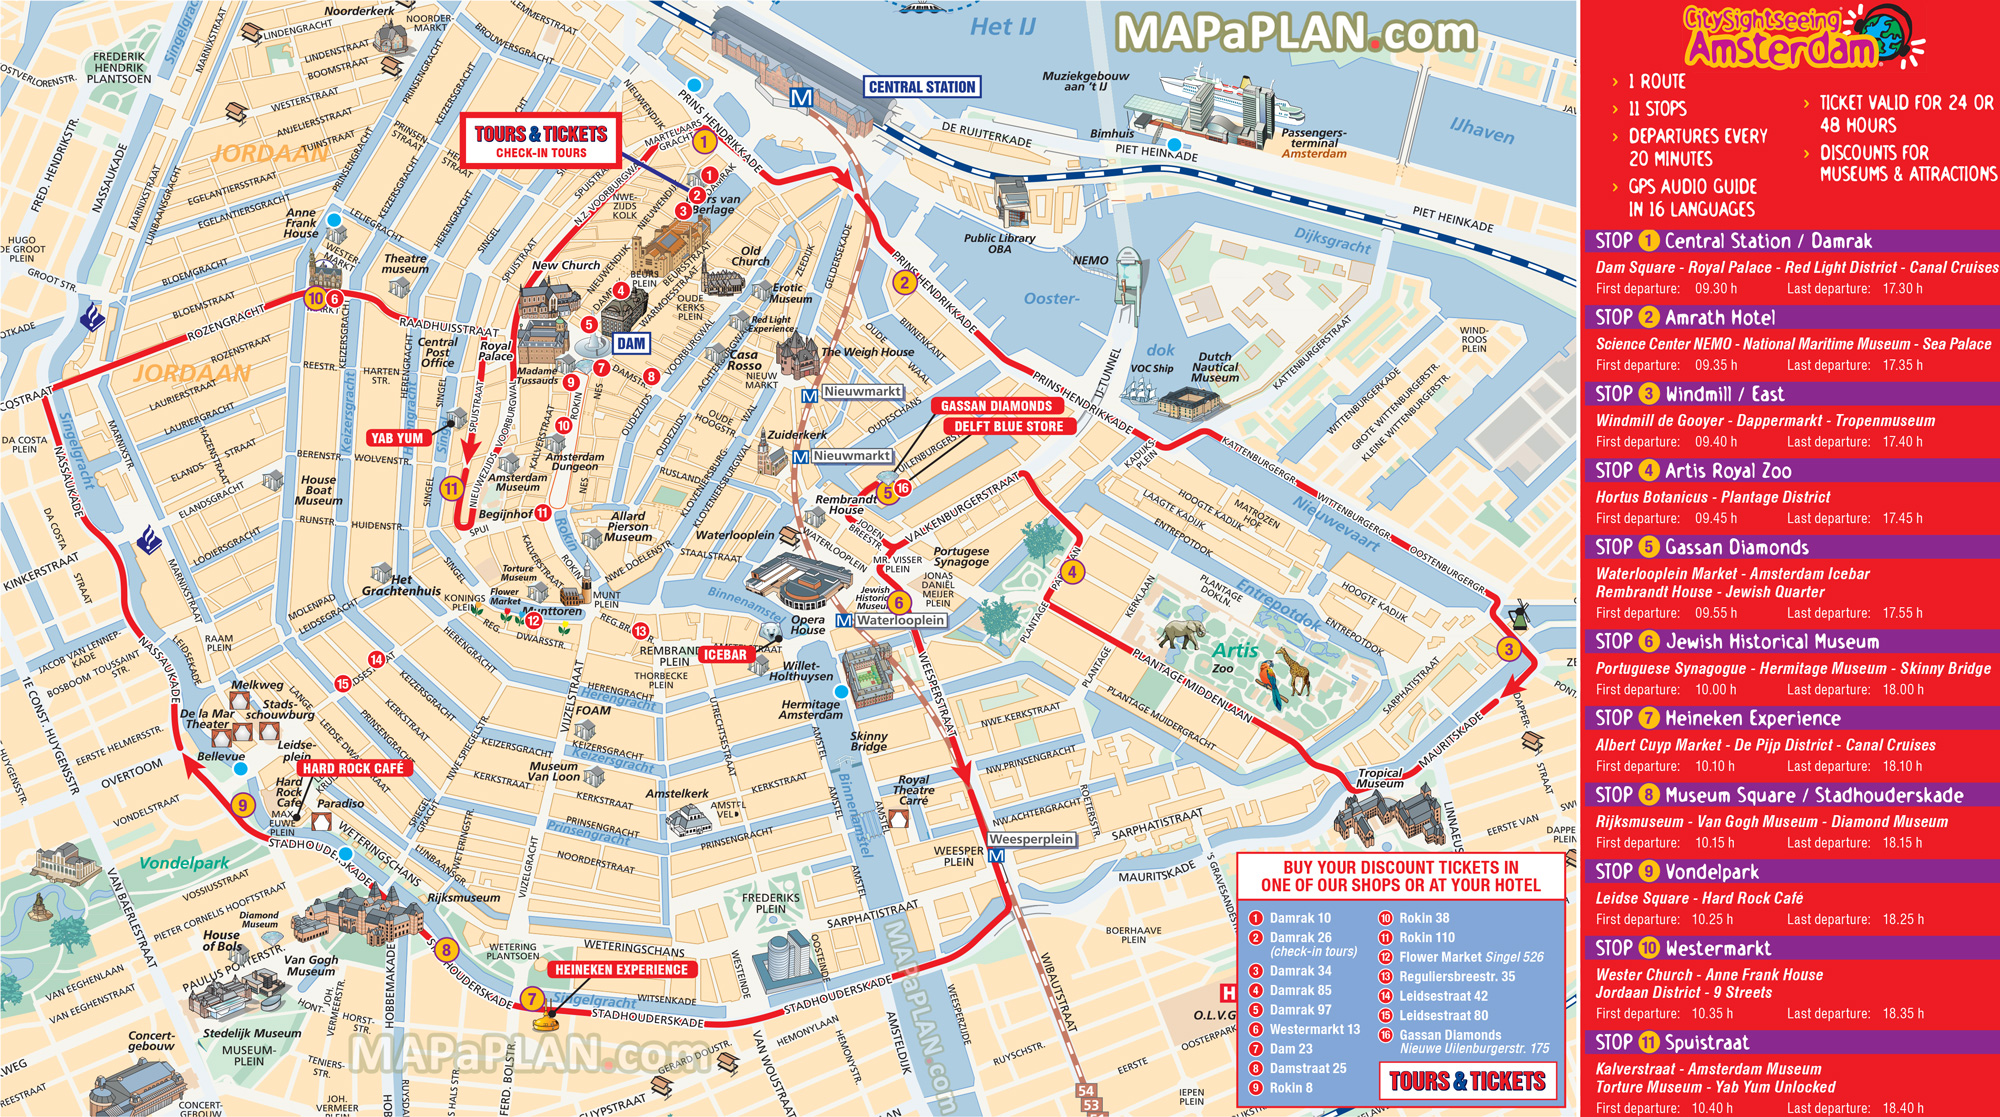 Amsterdam map - City Sightseeing hop-on hop-off bus tour routes ...